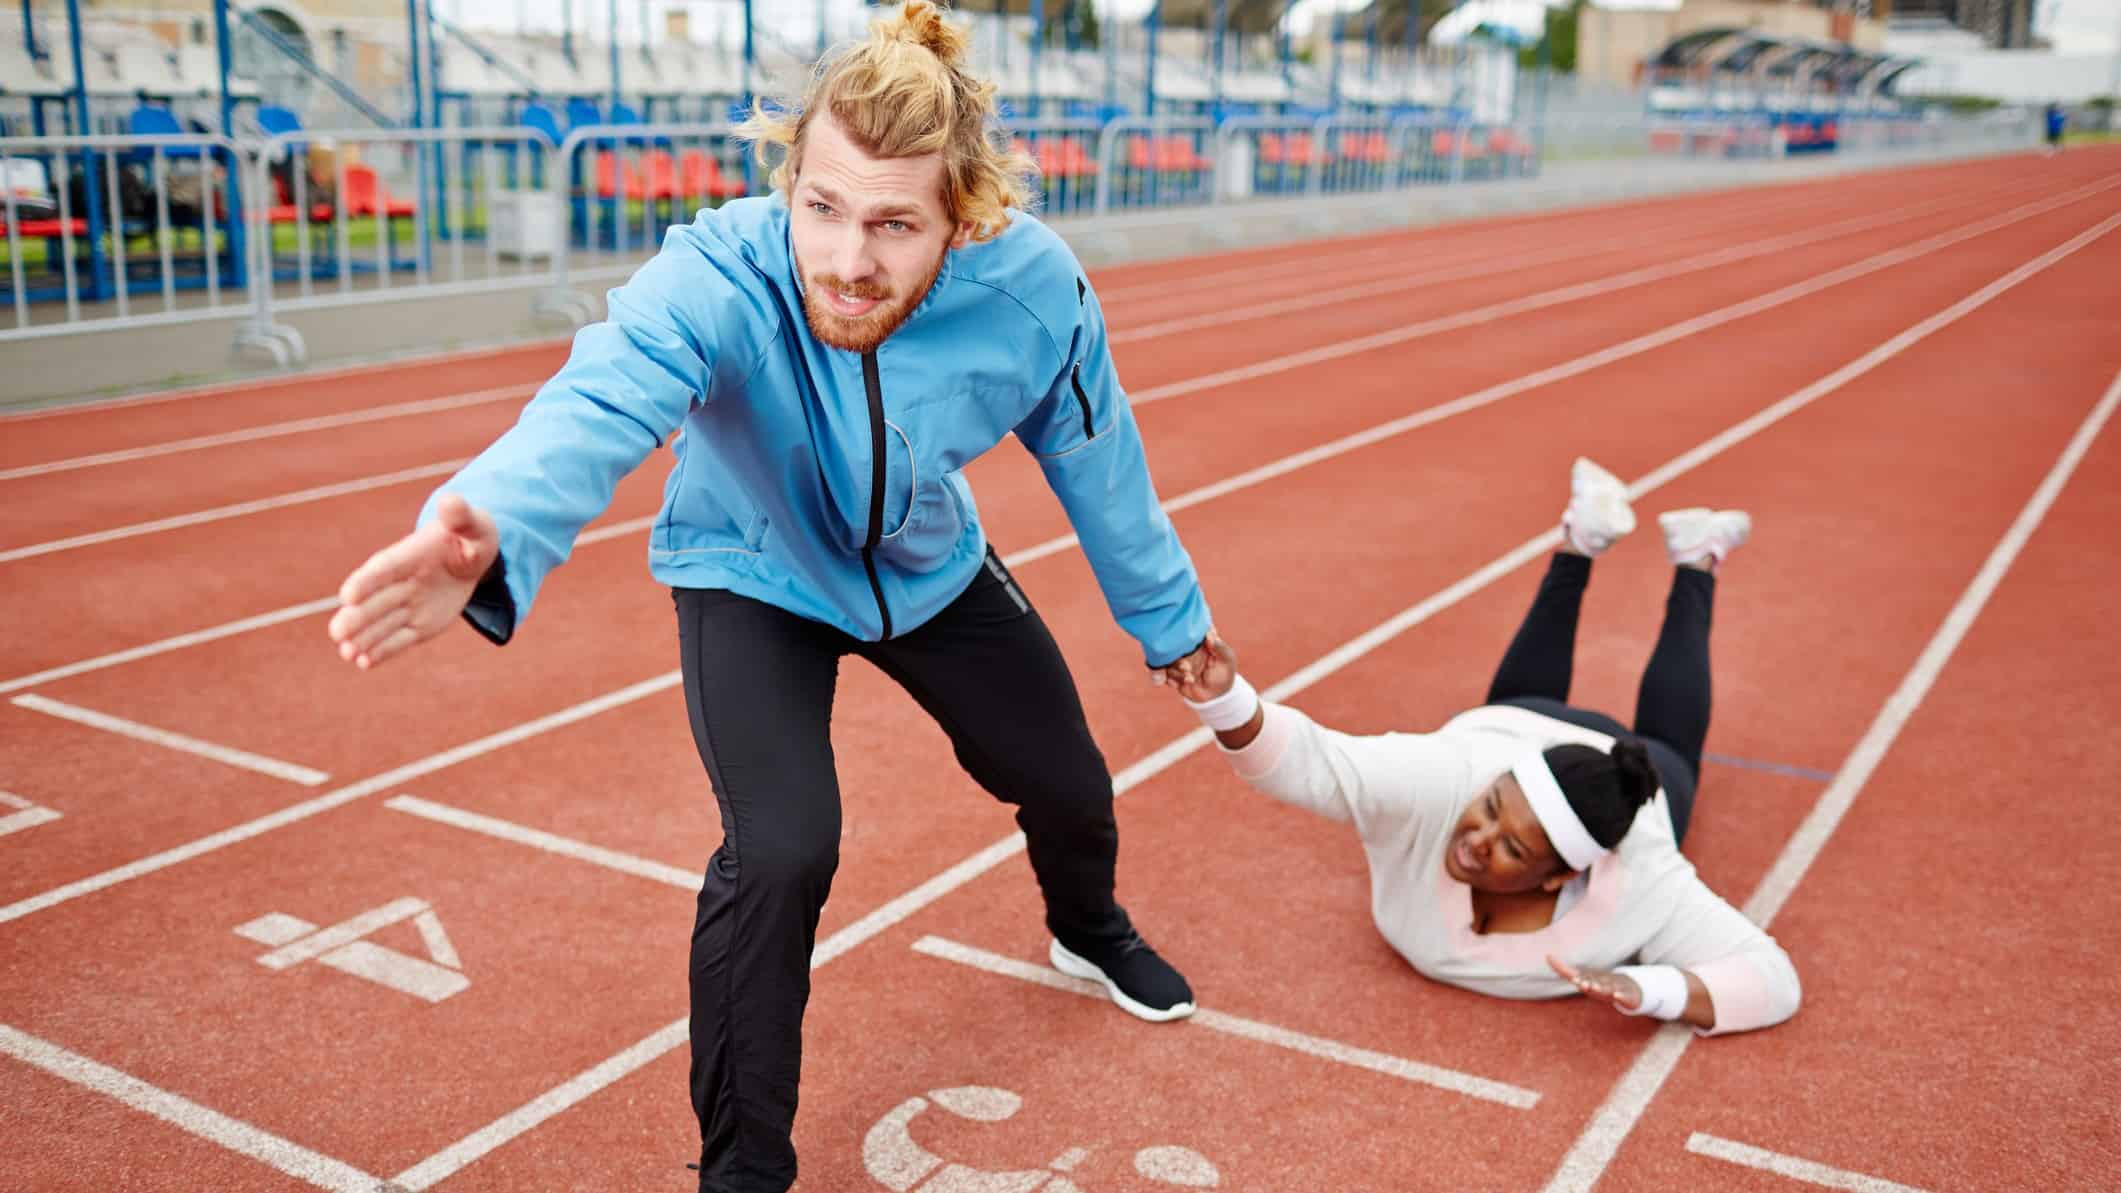 ANZ Bank share price 2021 man attempting to pull tired woman over finish line in running race